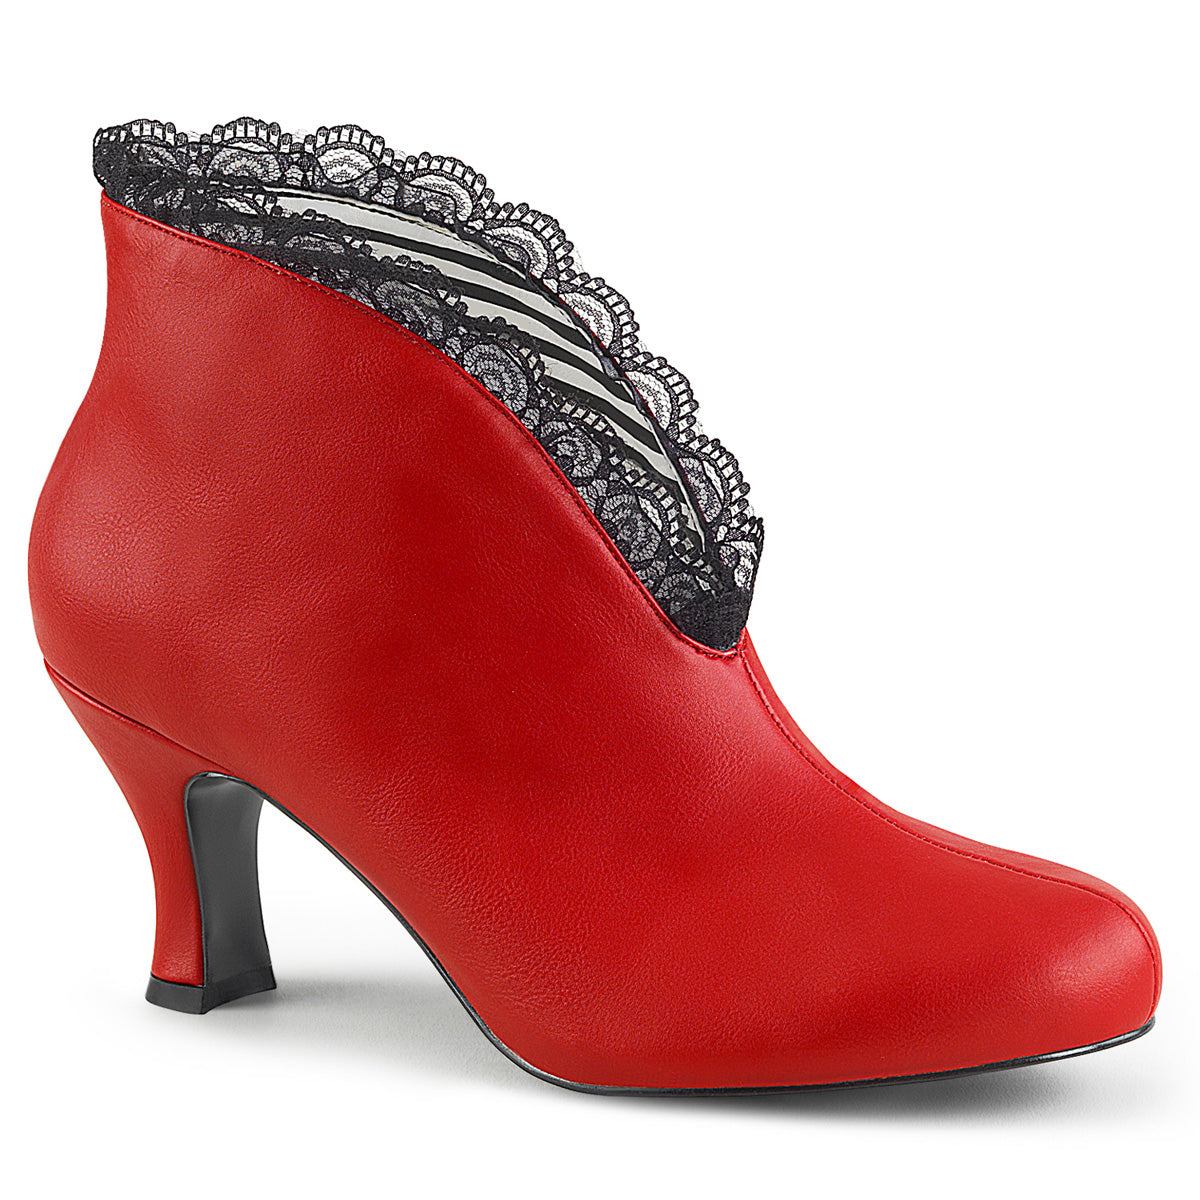 JENNA-105 - Red Fuax Leather-Blk Lace